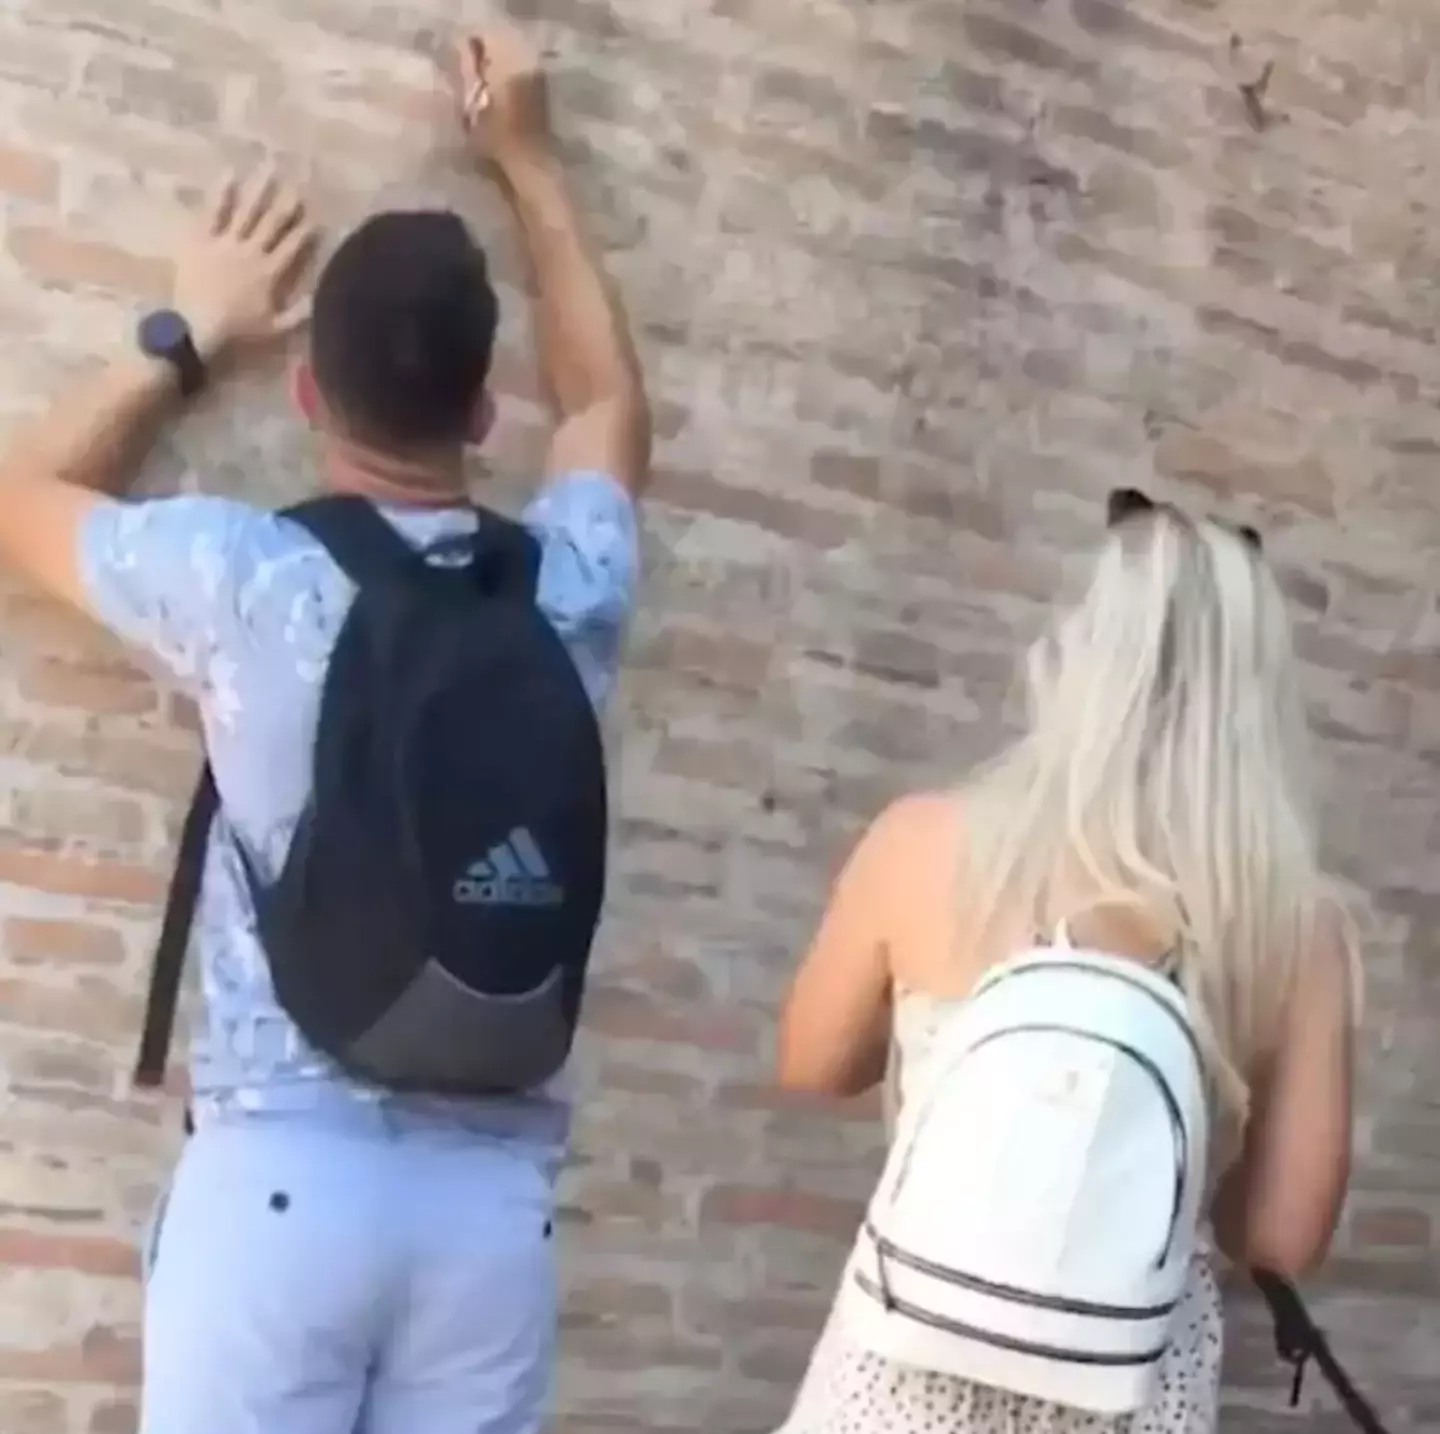 The man was seen defacing the Colosseum.